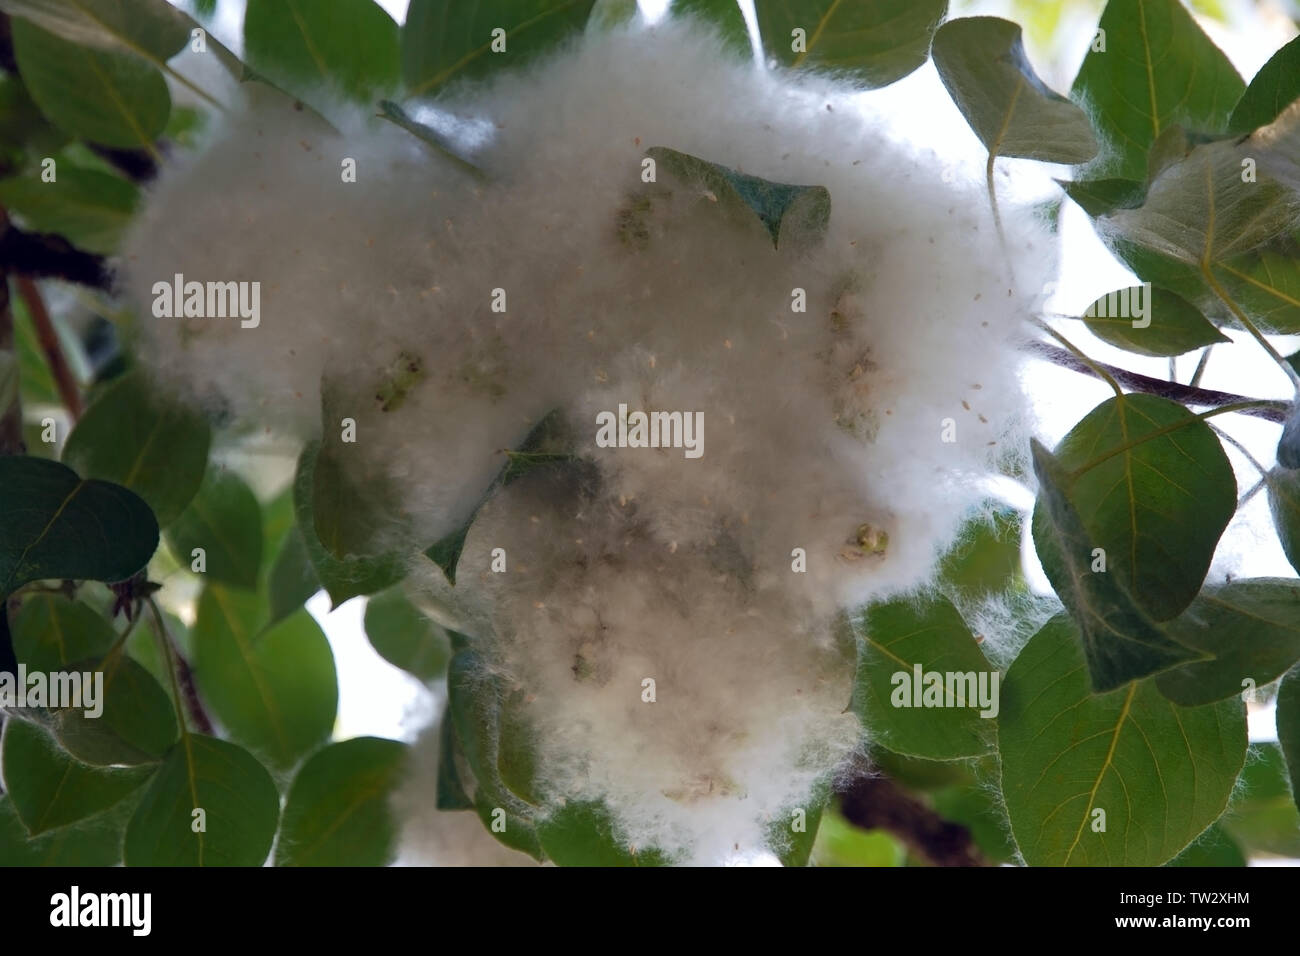 Lush flowering of poplar tree, poplar fluff is a strong allergen, dangerous time for people with allergies Stock Photo